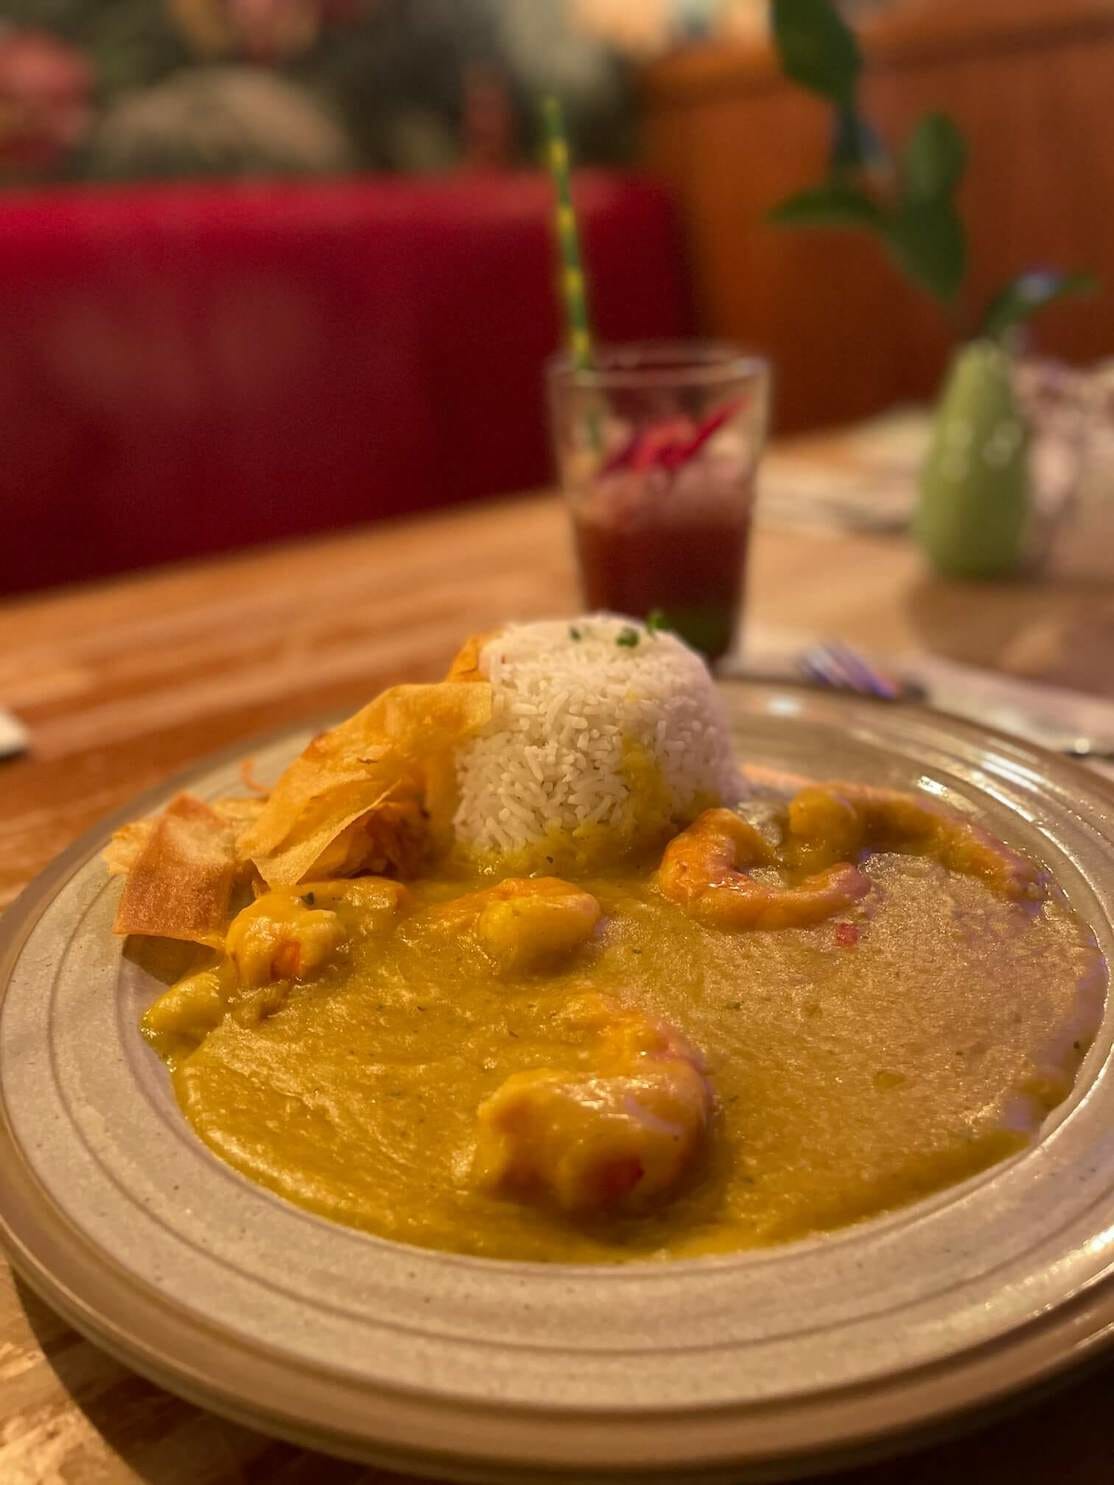 Bobó de camarão (shrimp stew with palm oil, coconut milk and cassava) with rice and chips served at Made in Brasil Restaurant, Camden, London